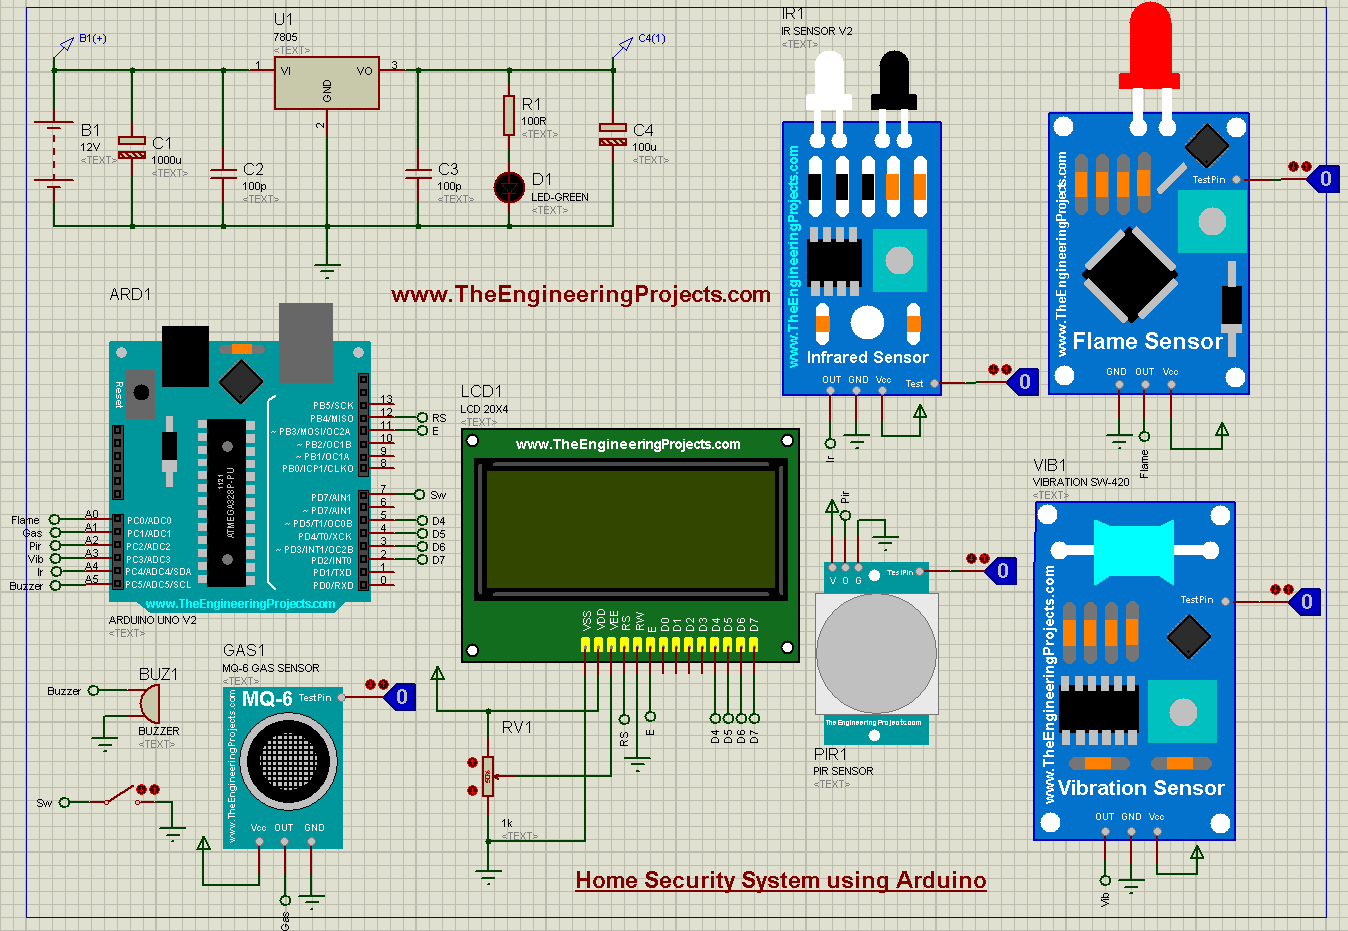 Home Security System using Arduino, Home Security System, Home Security System Arduino, arduino Home Security System, Home Security System simulation, Home Security System in proteus, Home Security Project